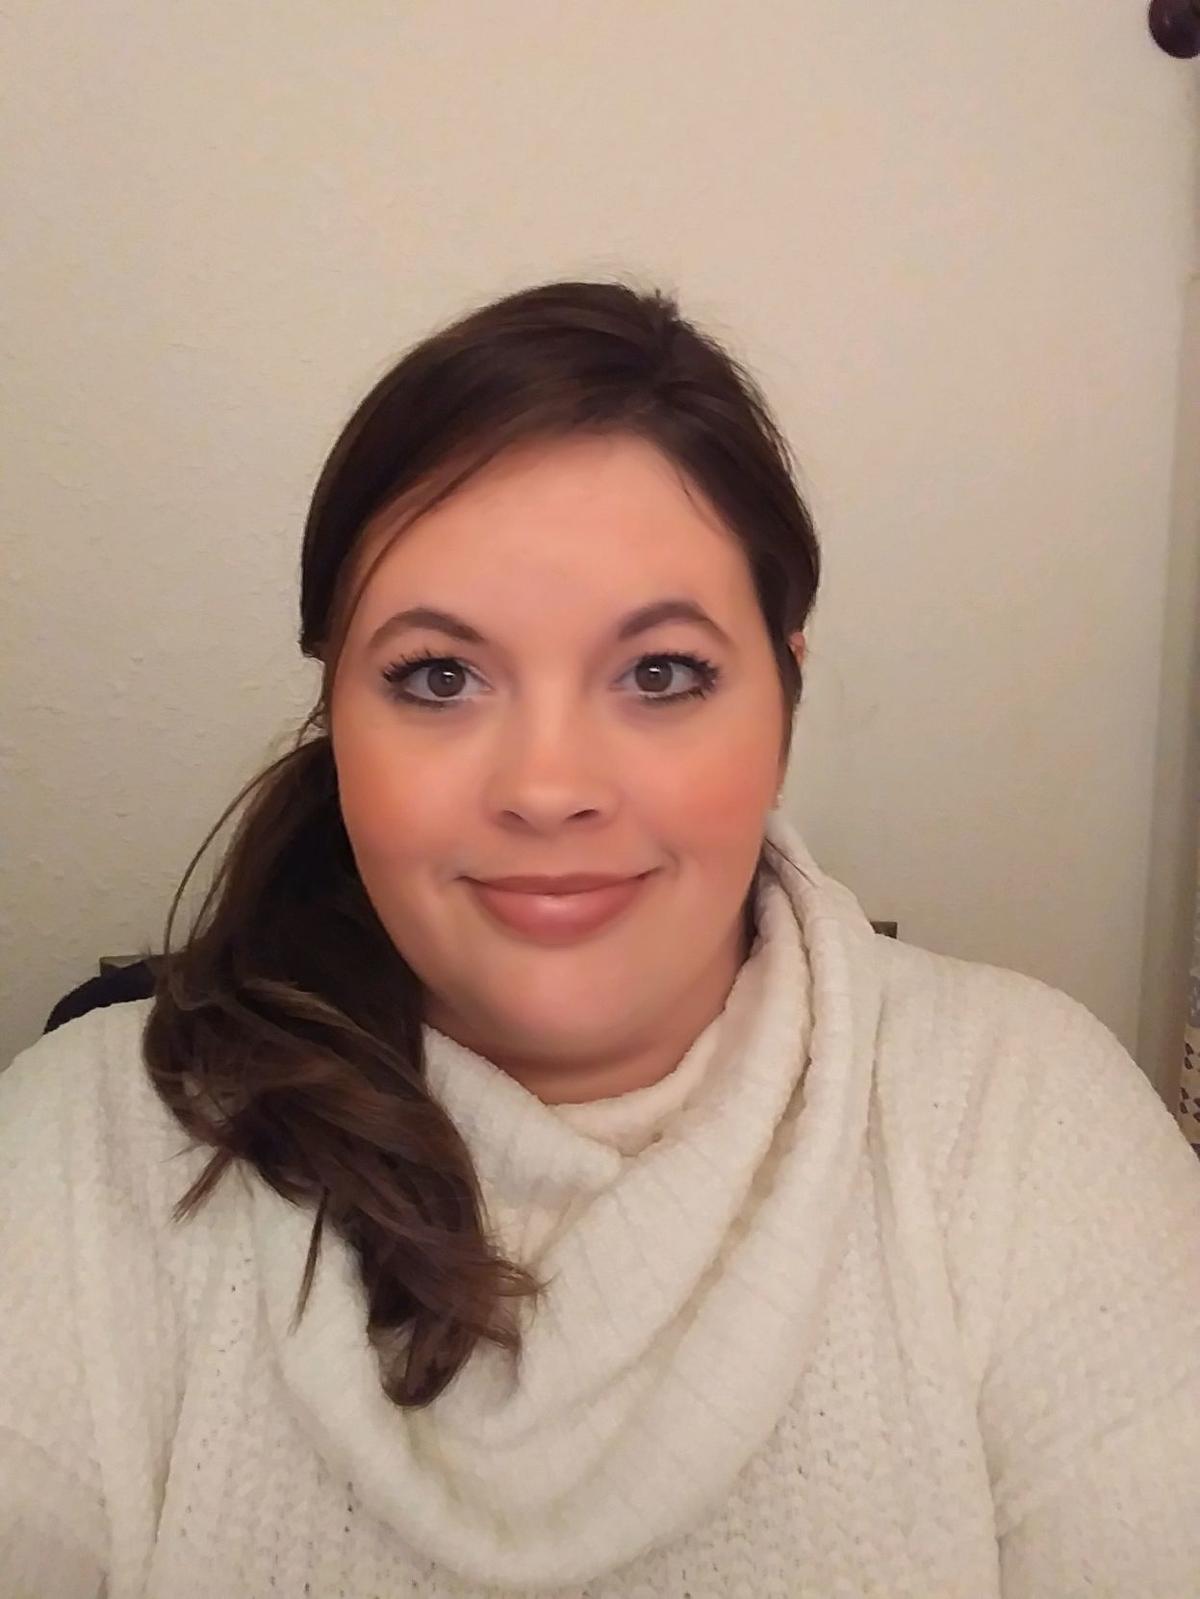 Heidi Sagert named office manager of IMKO Workforce Solutions ...